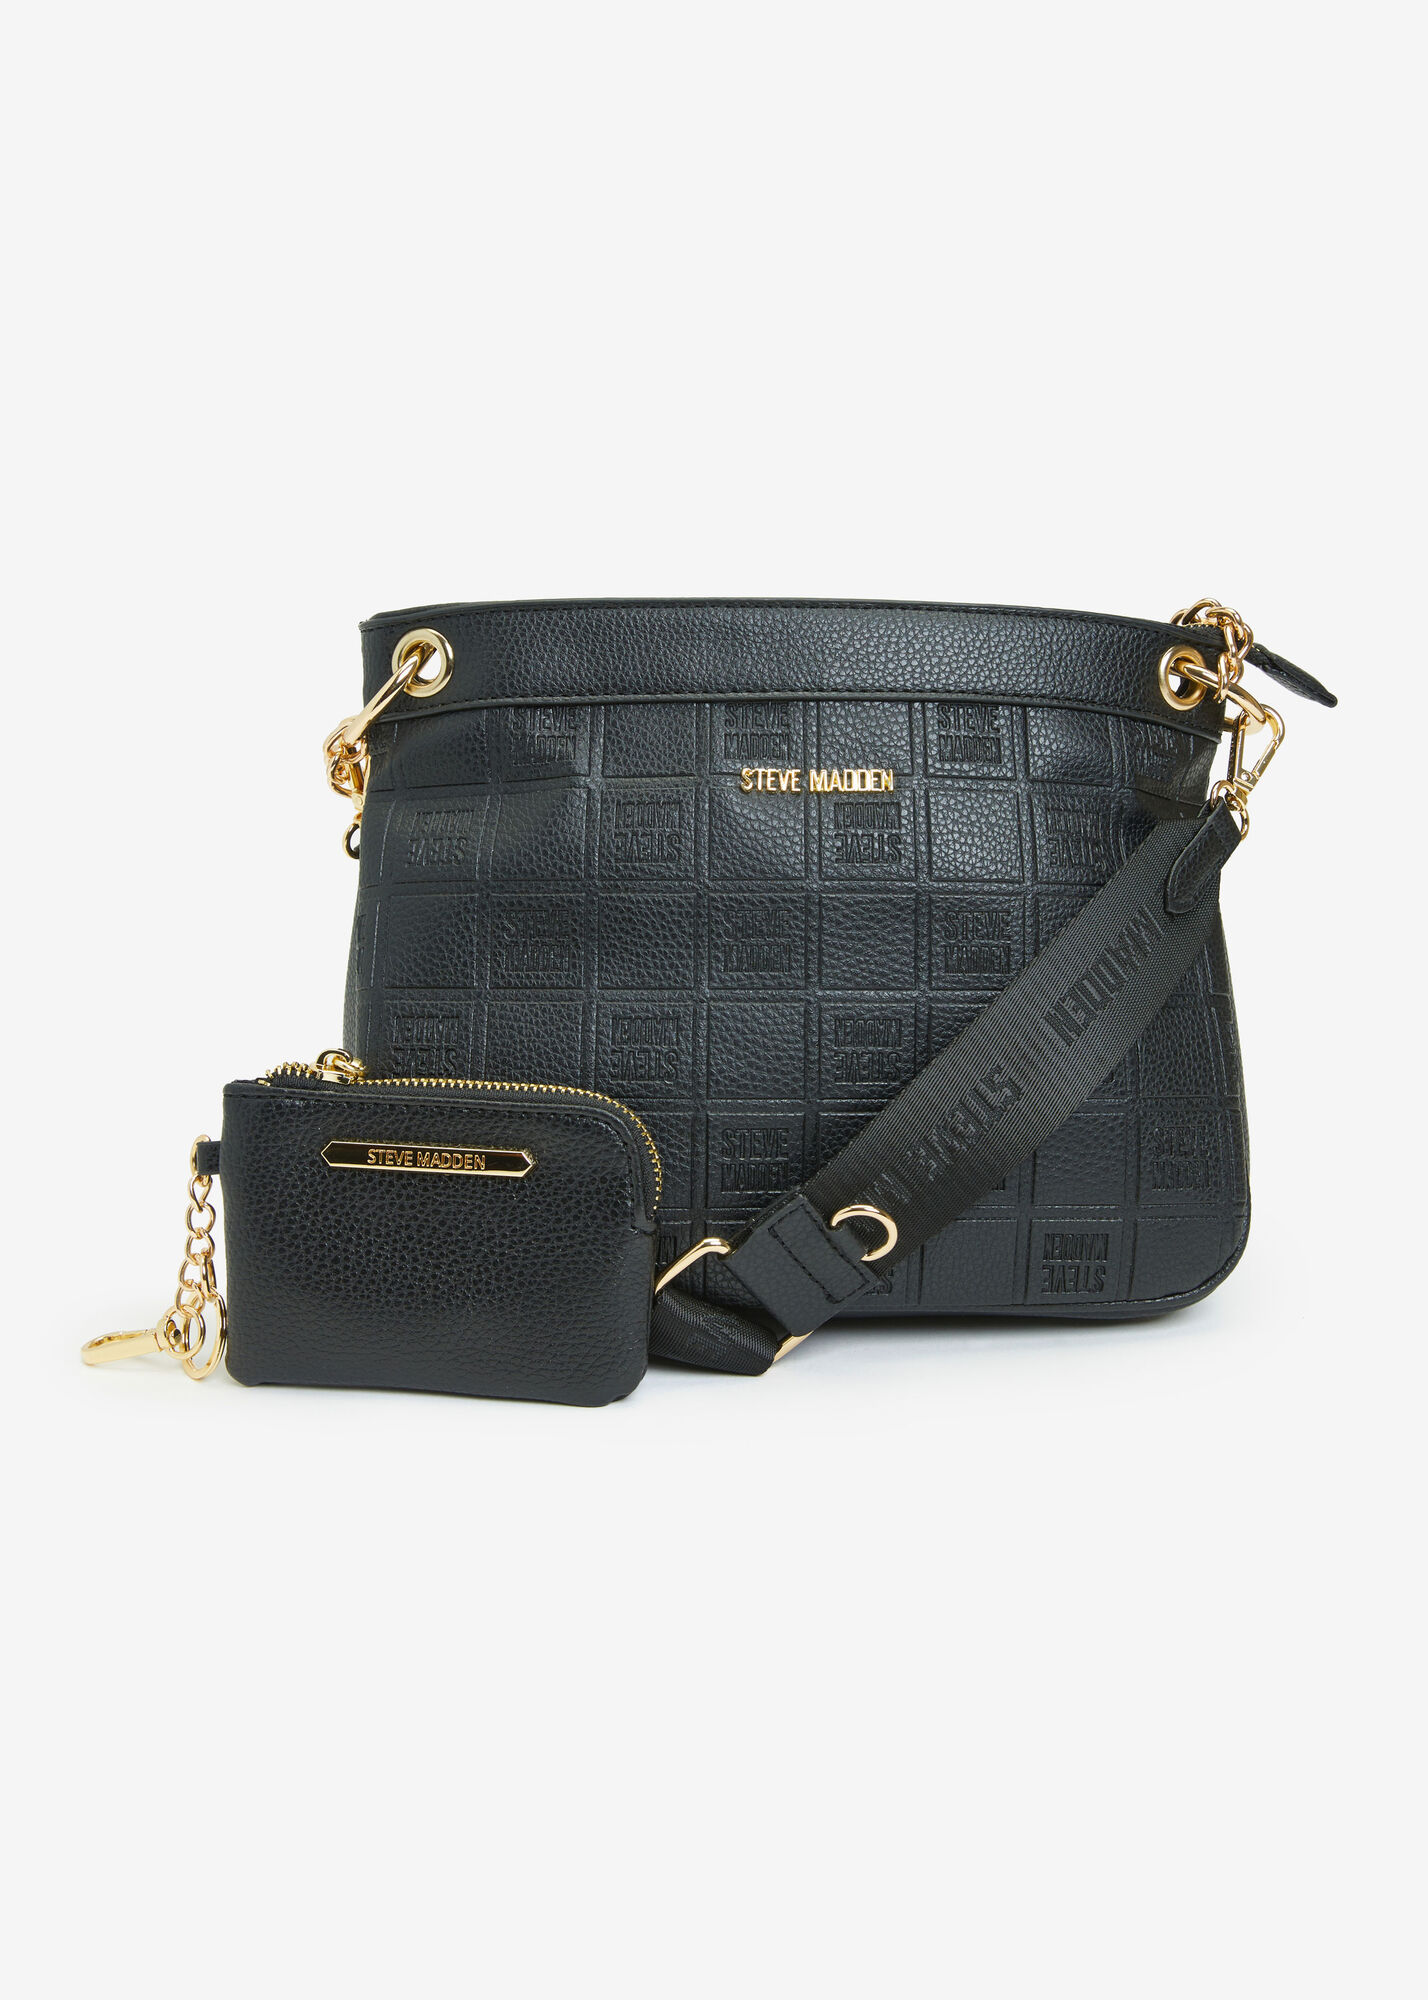 Madden BCarrie Crossbody Chic Leather